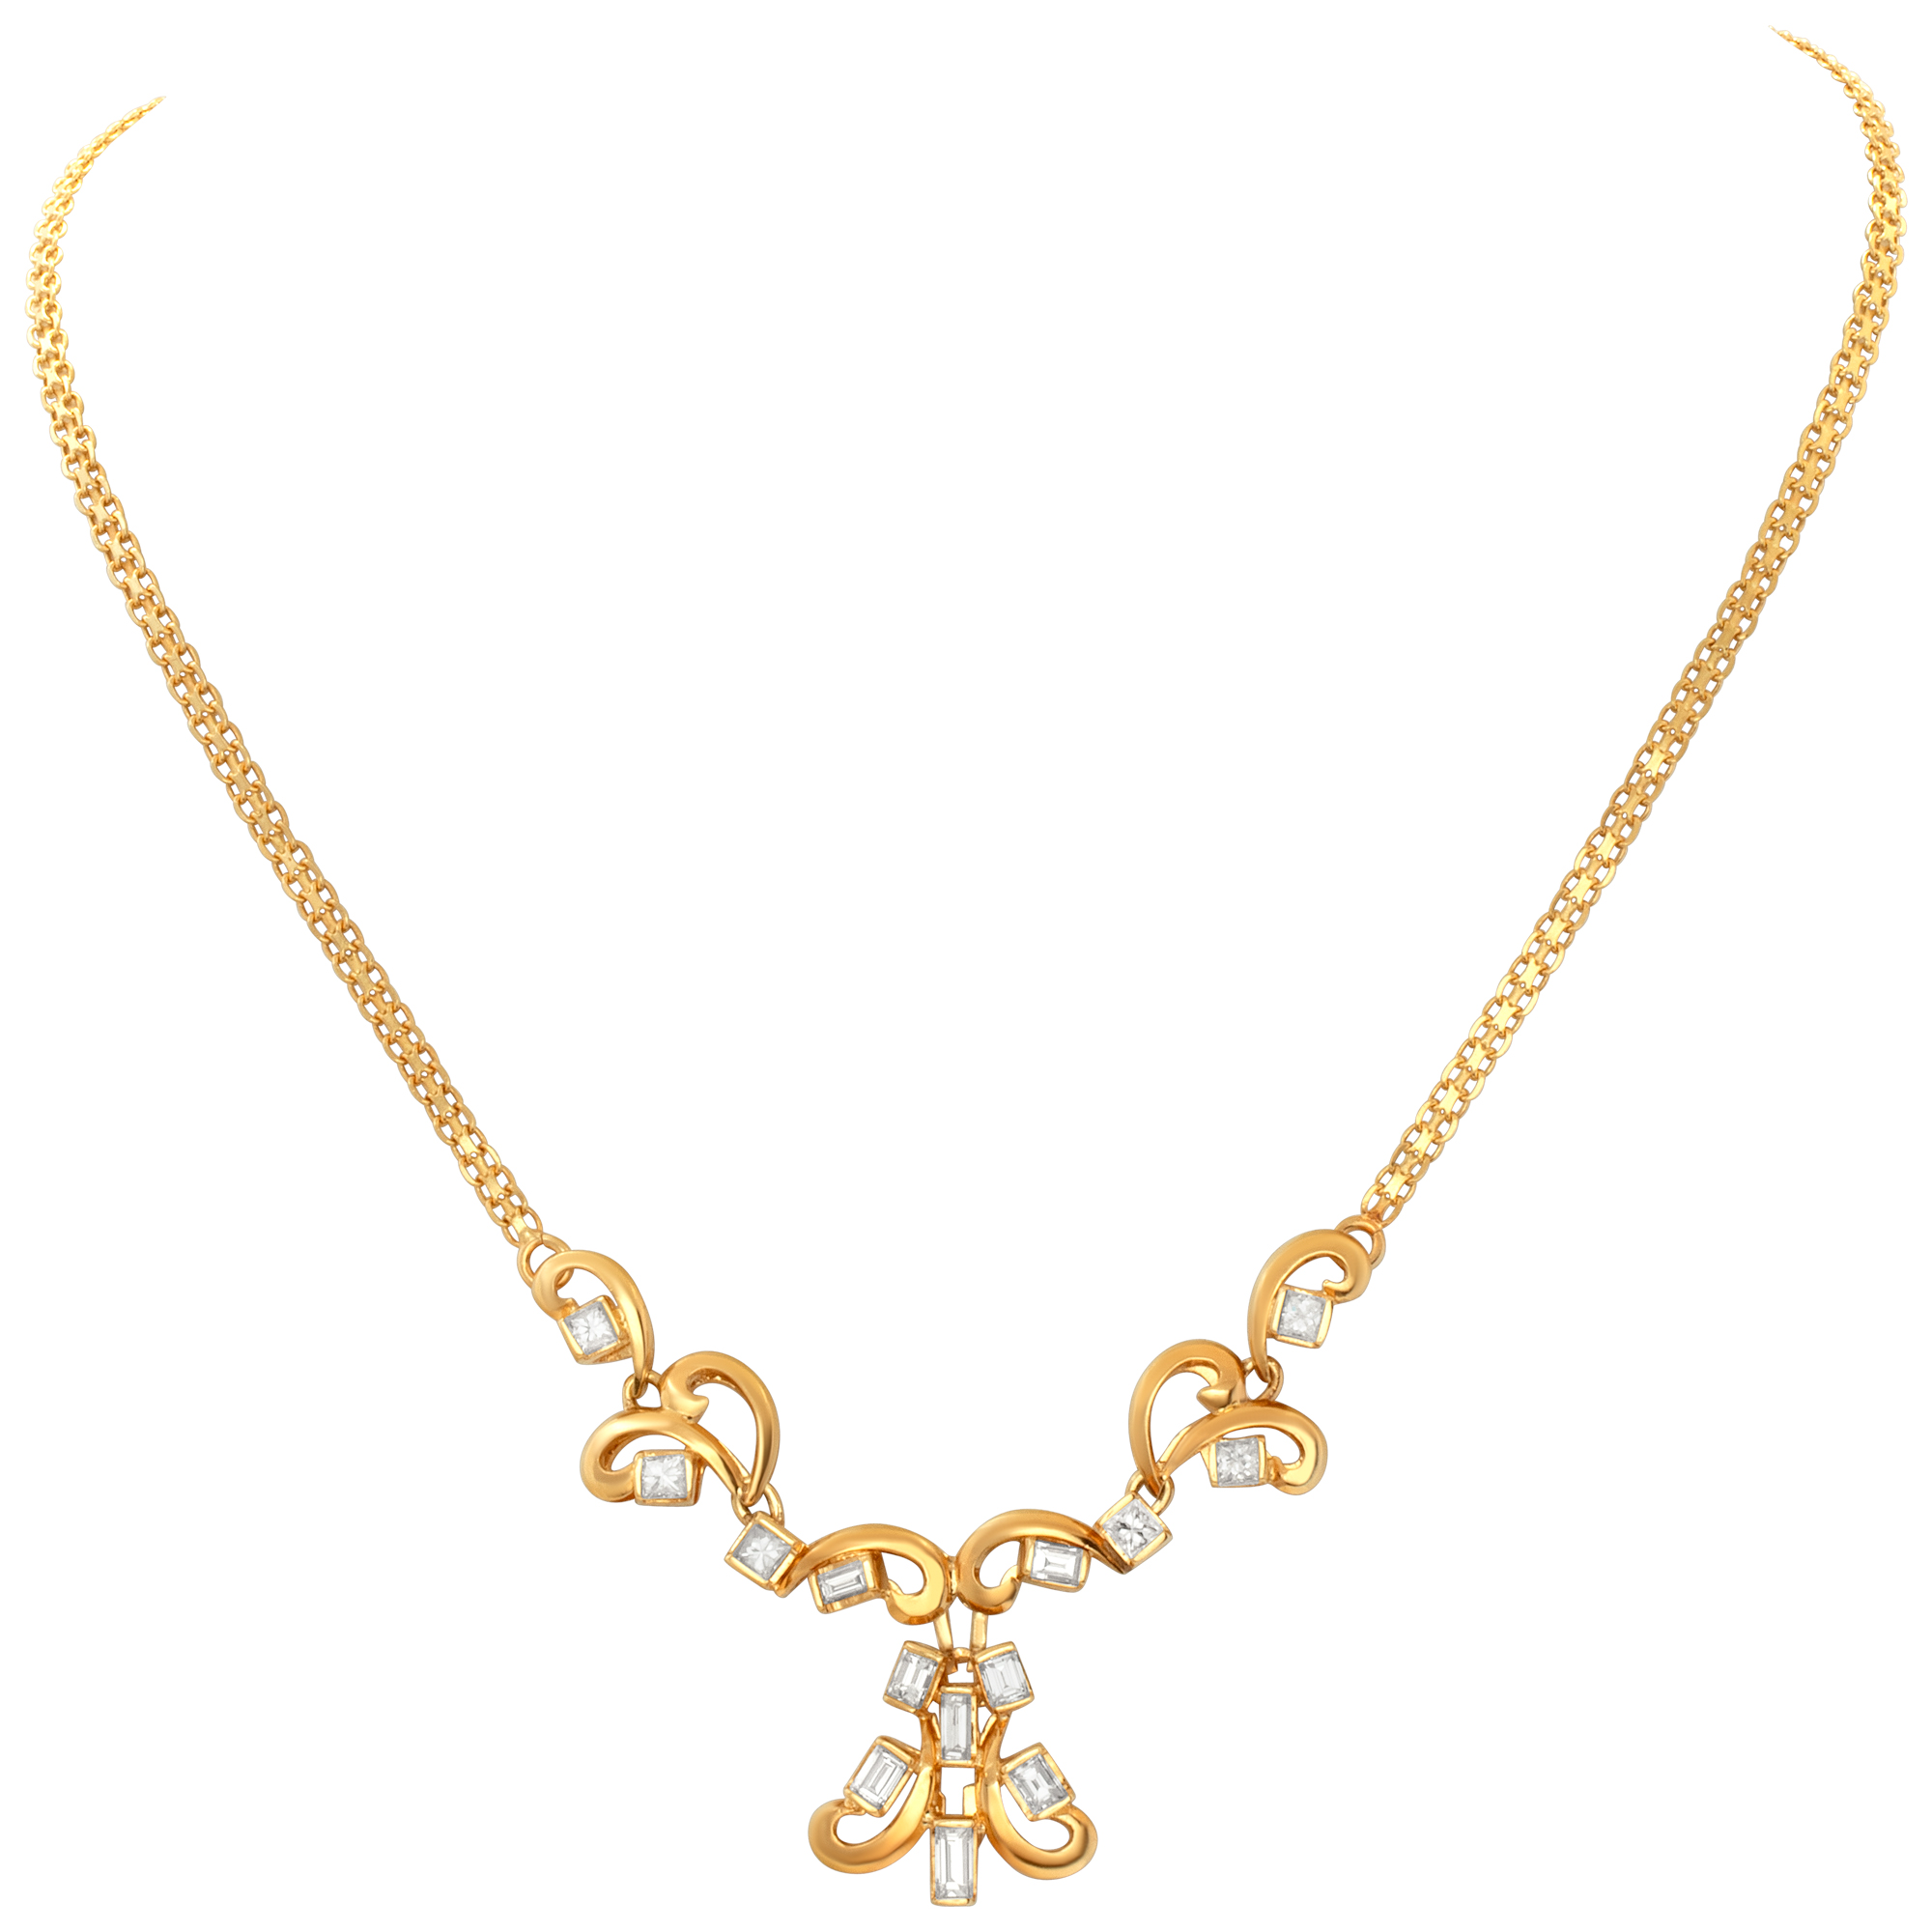 Swirl diamond necklace in 18k yellow gold with over 2 carats image 2